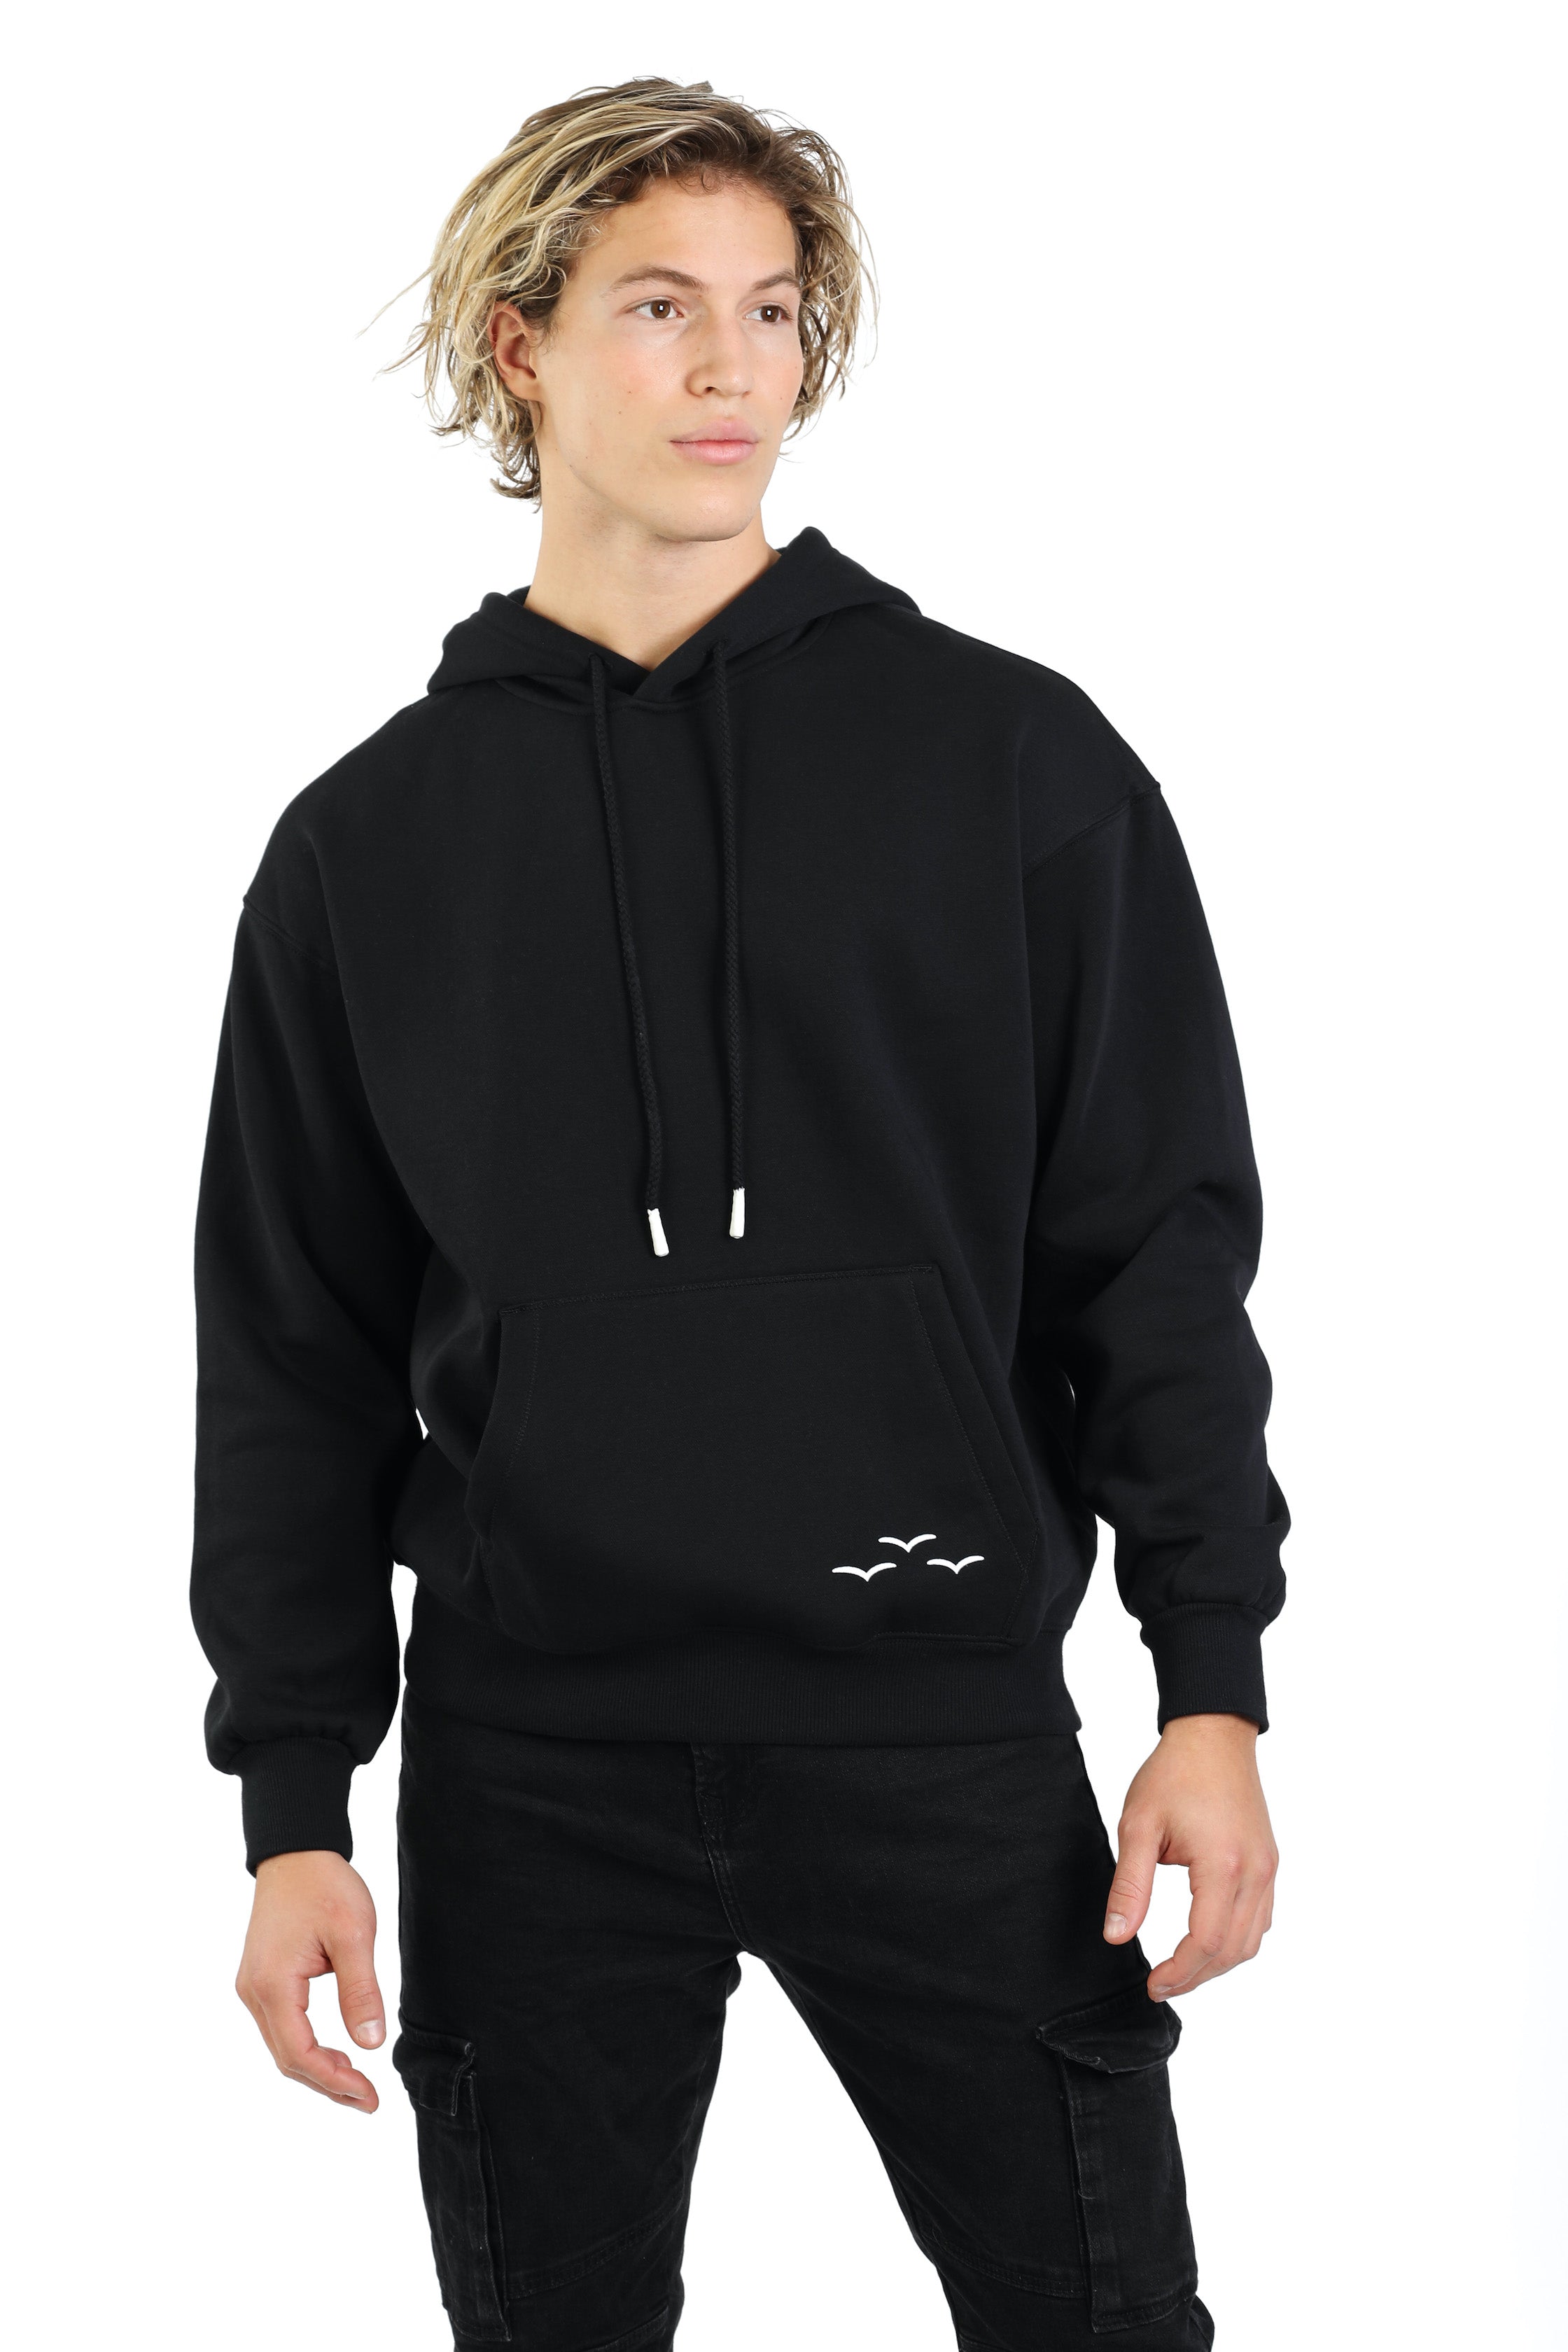 Men's hoodie in Black from Lazypants - always a great buy at a reasonable price.